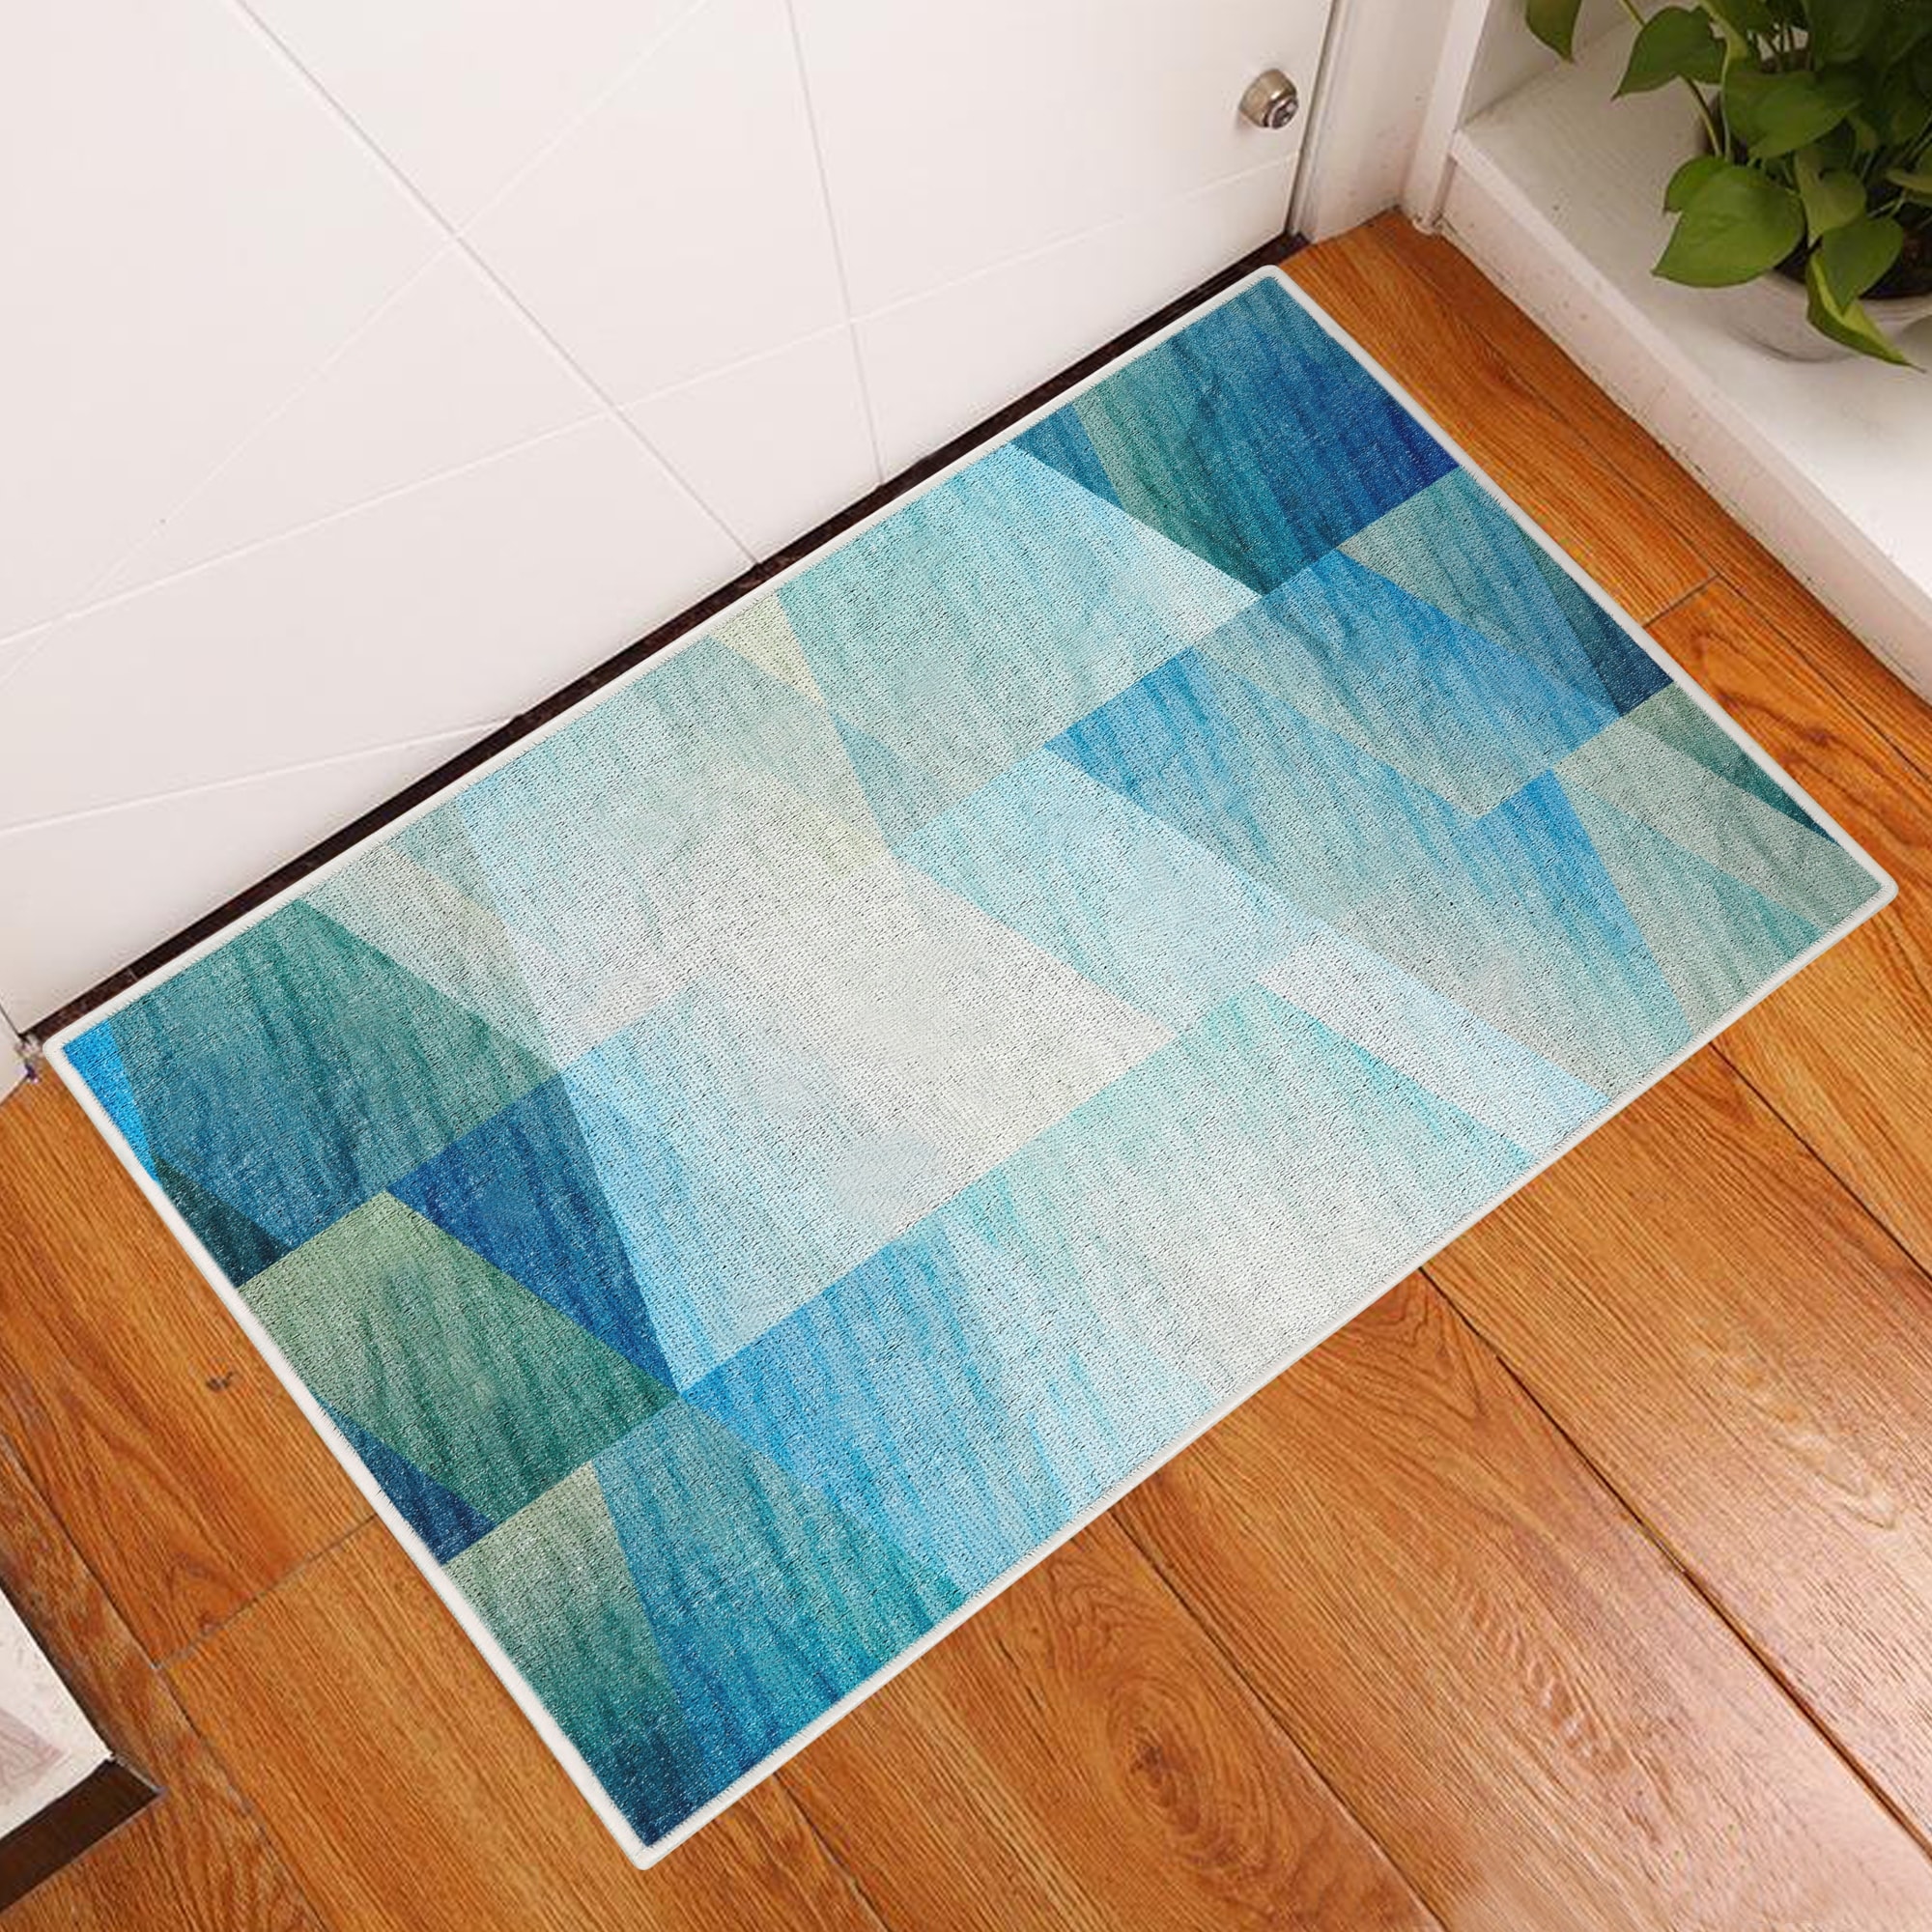 https://ak1.ostkcdn.com/images/products/is/images/direct/d37a9246dff426e9a4997d13b5820f297fe4bfce/Sea-Collection-2-x-3-Foot-Rug-Runner-Thin-Non-Slip-Area-Rug---Cotton-Indoor-Rug-for-Front-Door-Foyer-Rug-for-Entryway.jpg